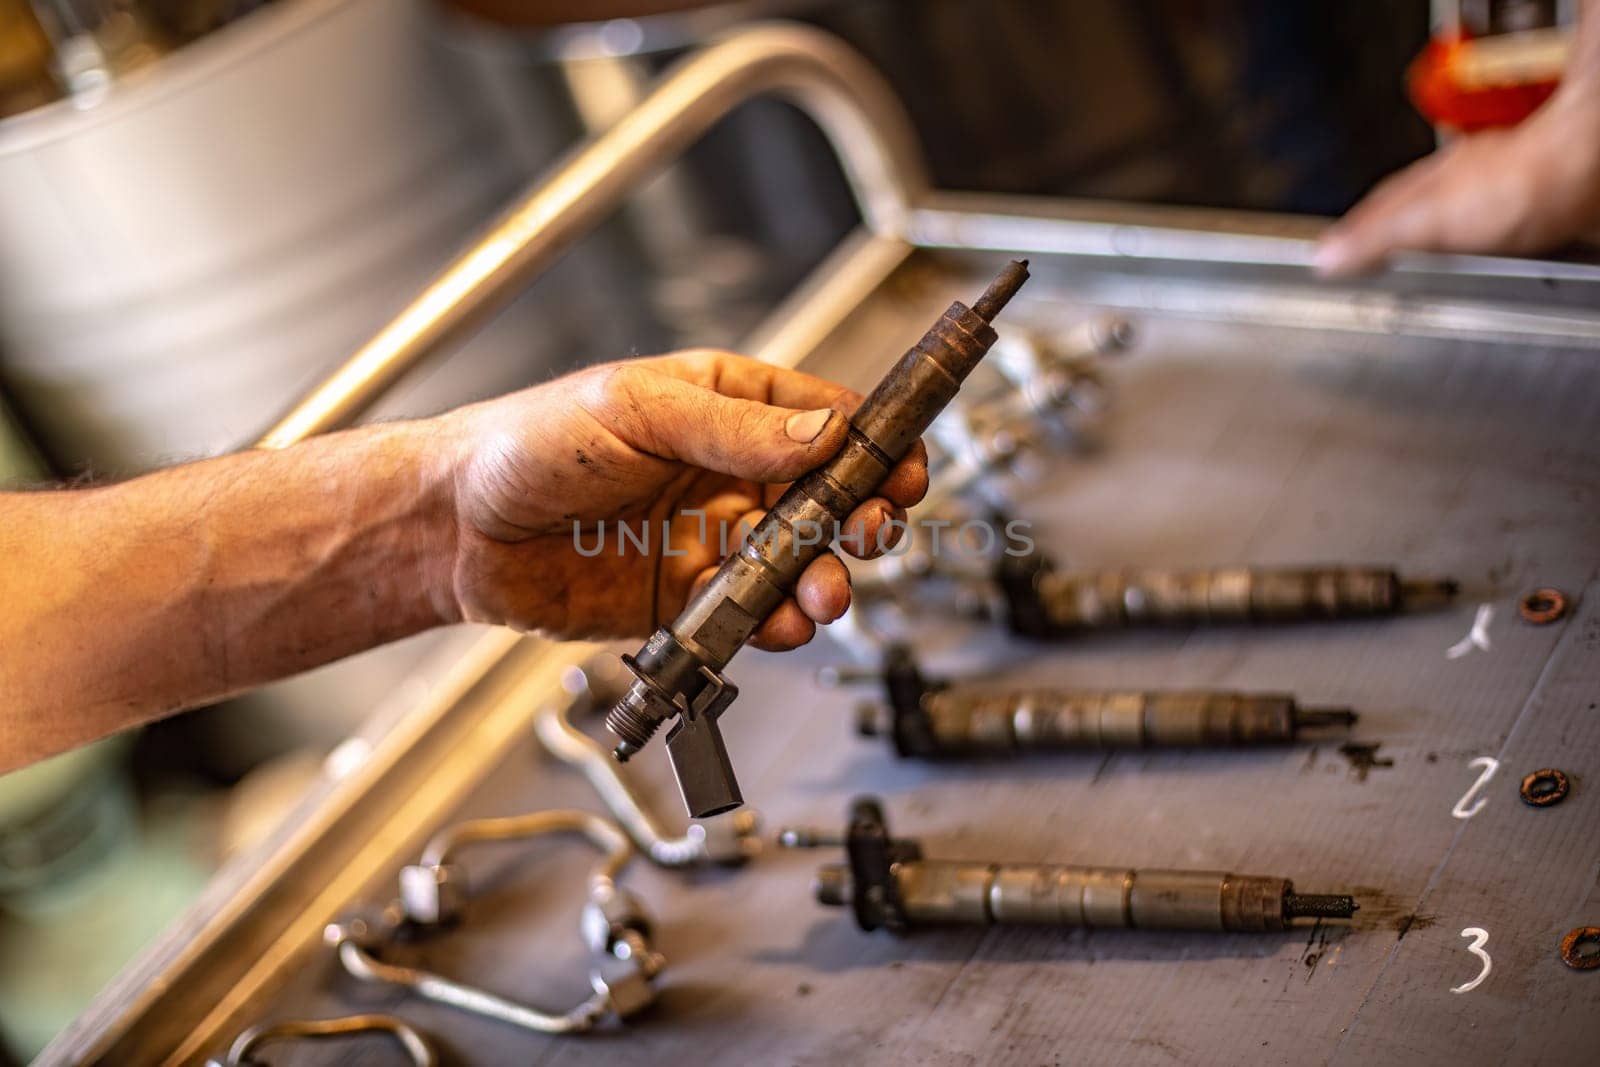 Close-up of a mechanic’s dirty hands holding a diesel engine injector, focus on repair work.